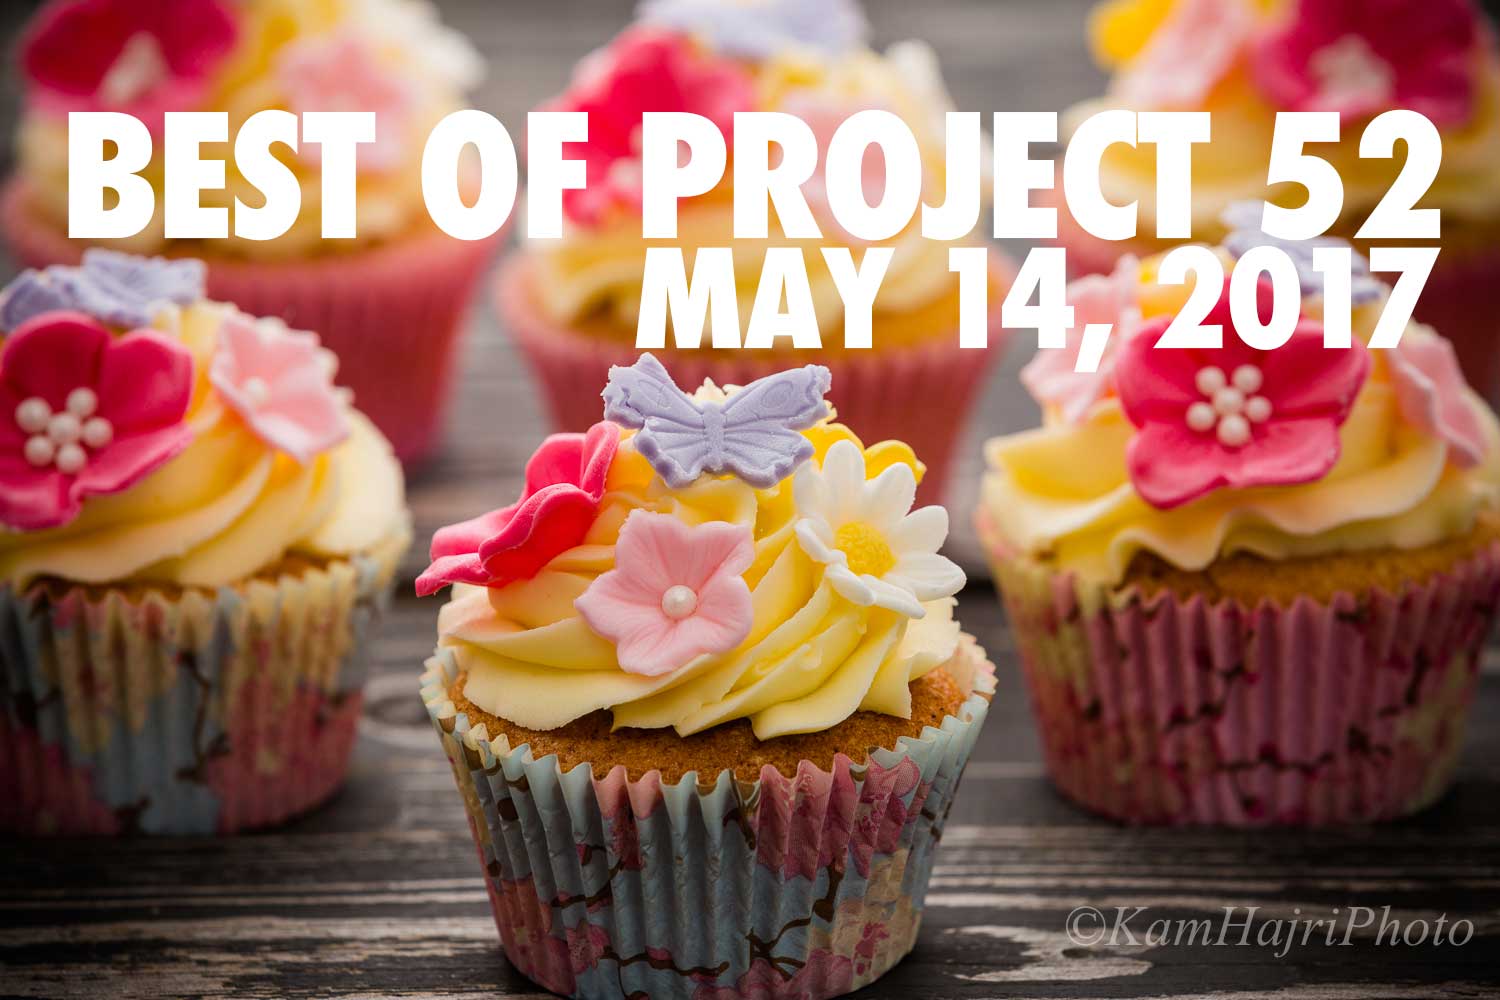 Best of Project 52: May 14th, 2017 Edition